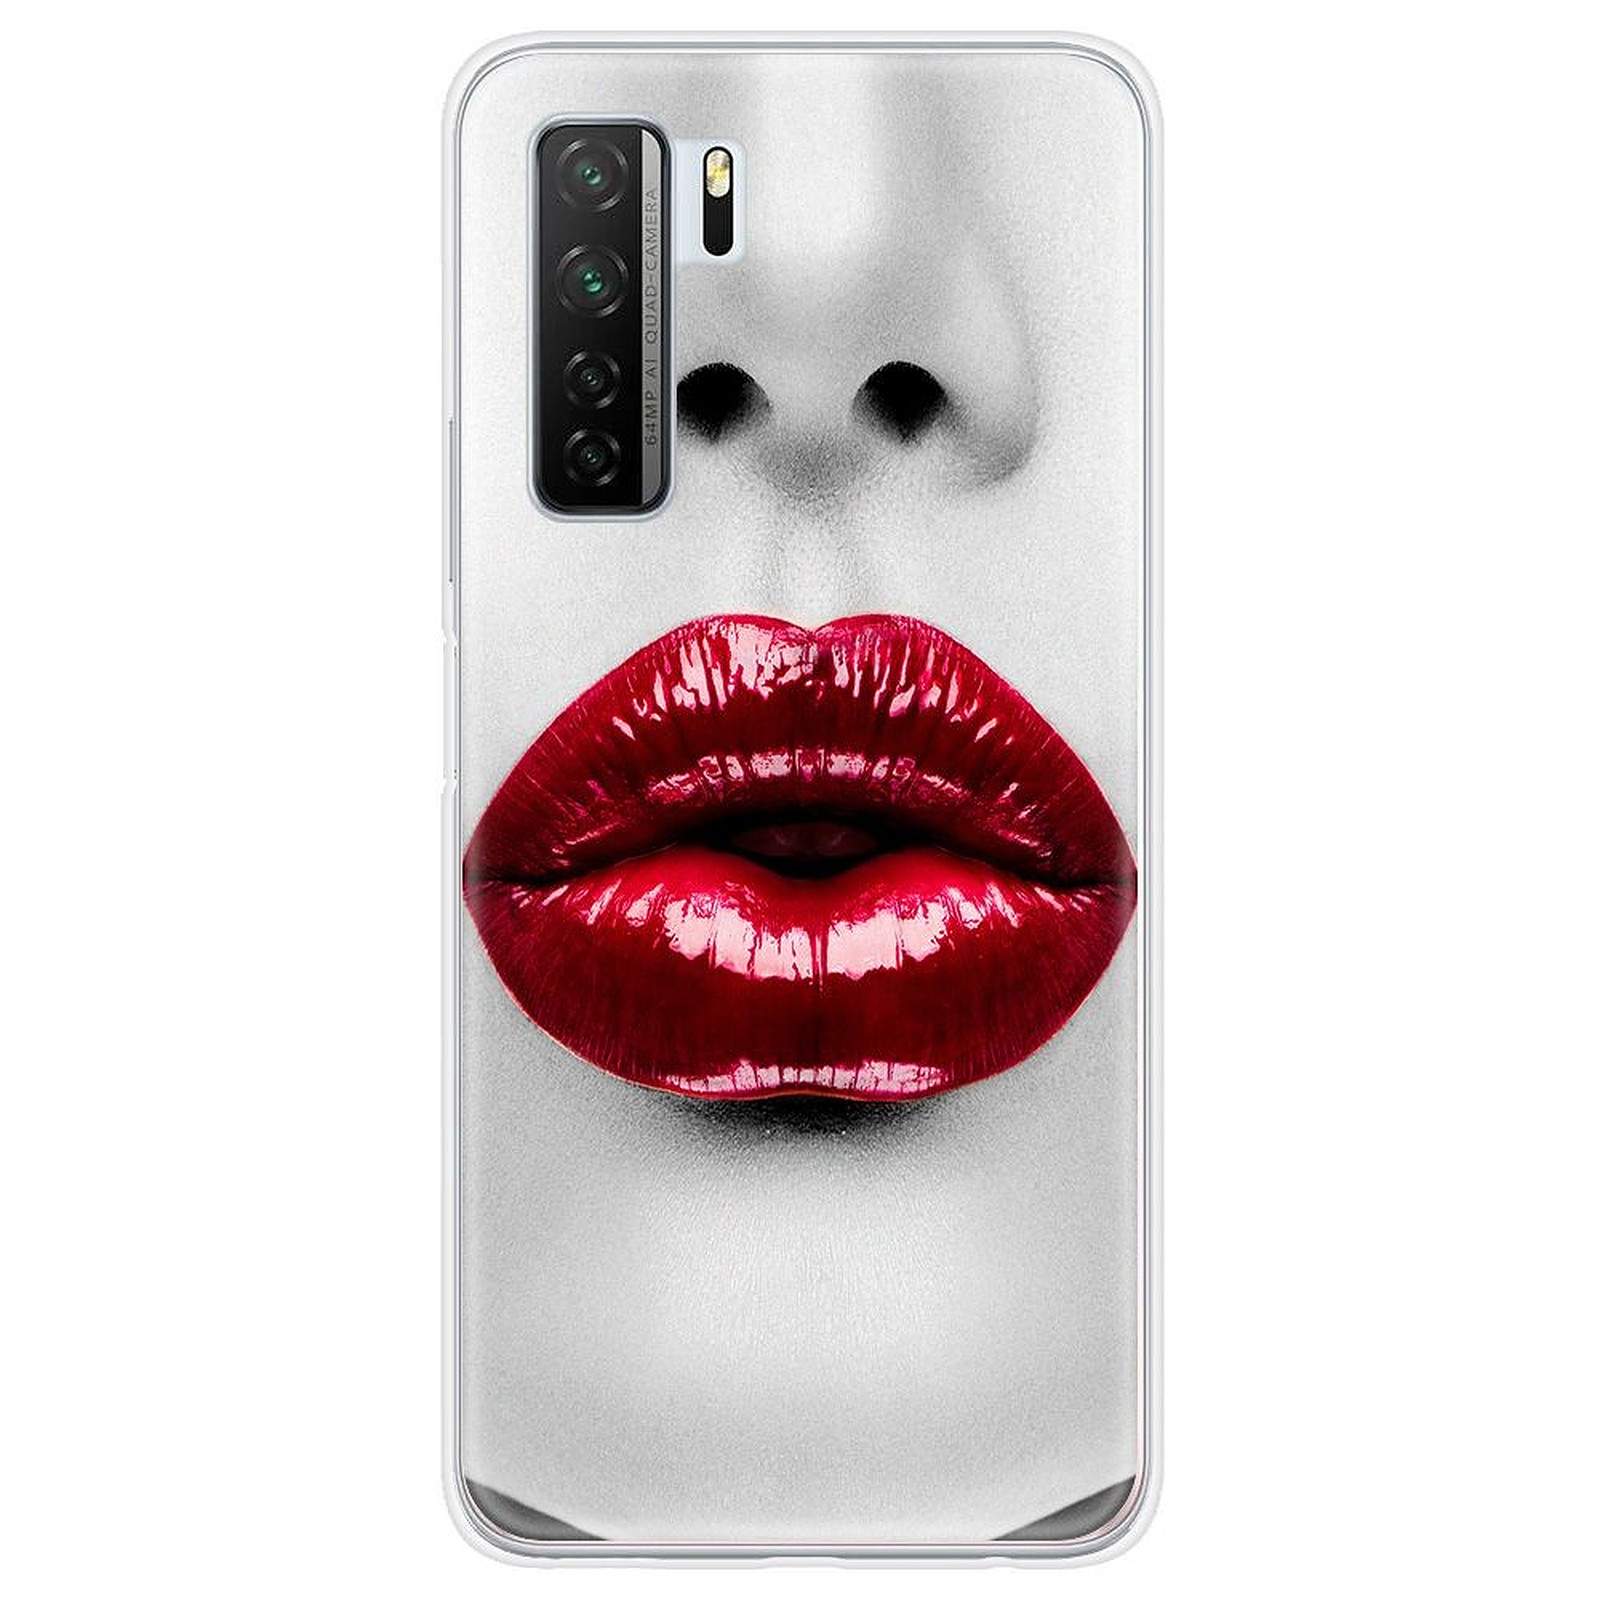 1001 Coques Coque silicone gel Huawei P40 Lite 5G motif Lèvres Rouges - Coque telephone 1001Coques